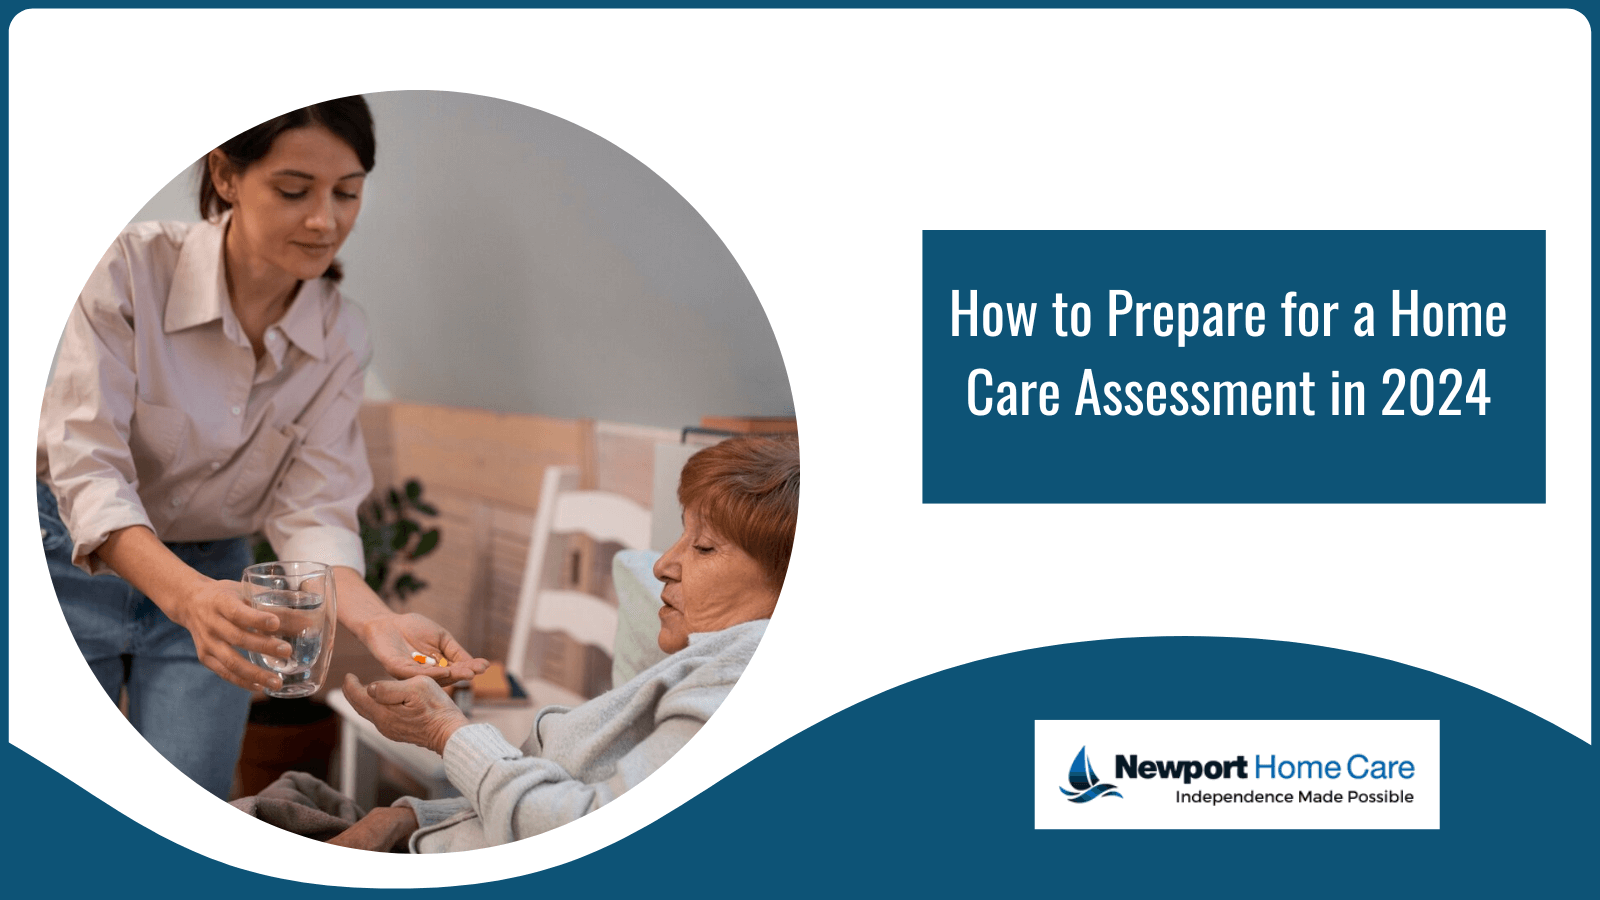 How to Prepare for a Home Care Assessment in 2024